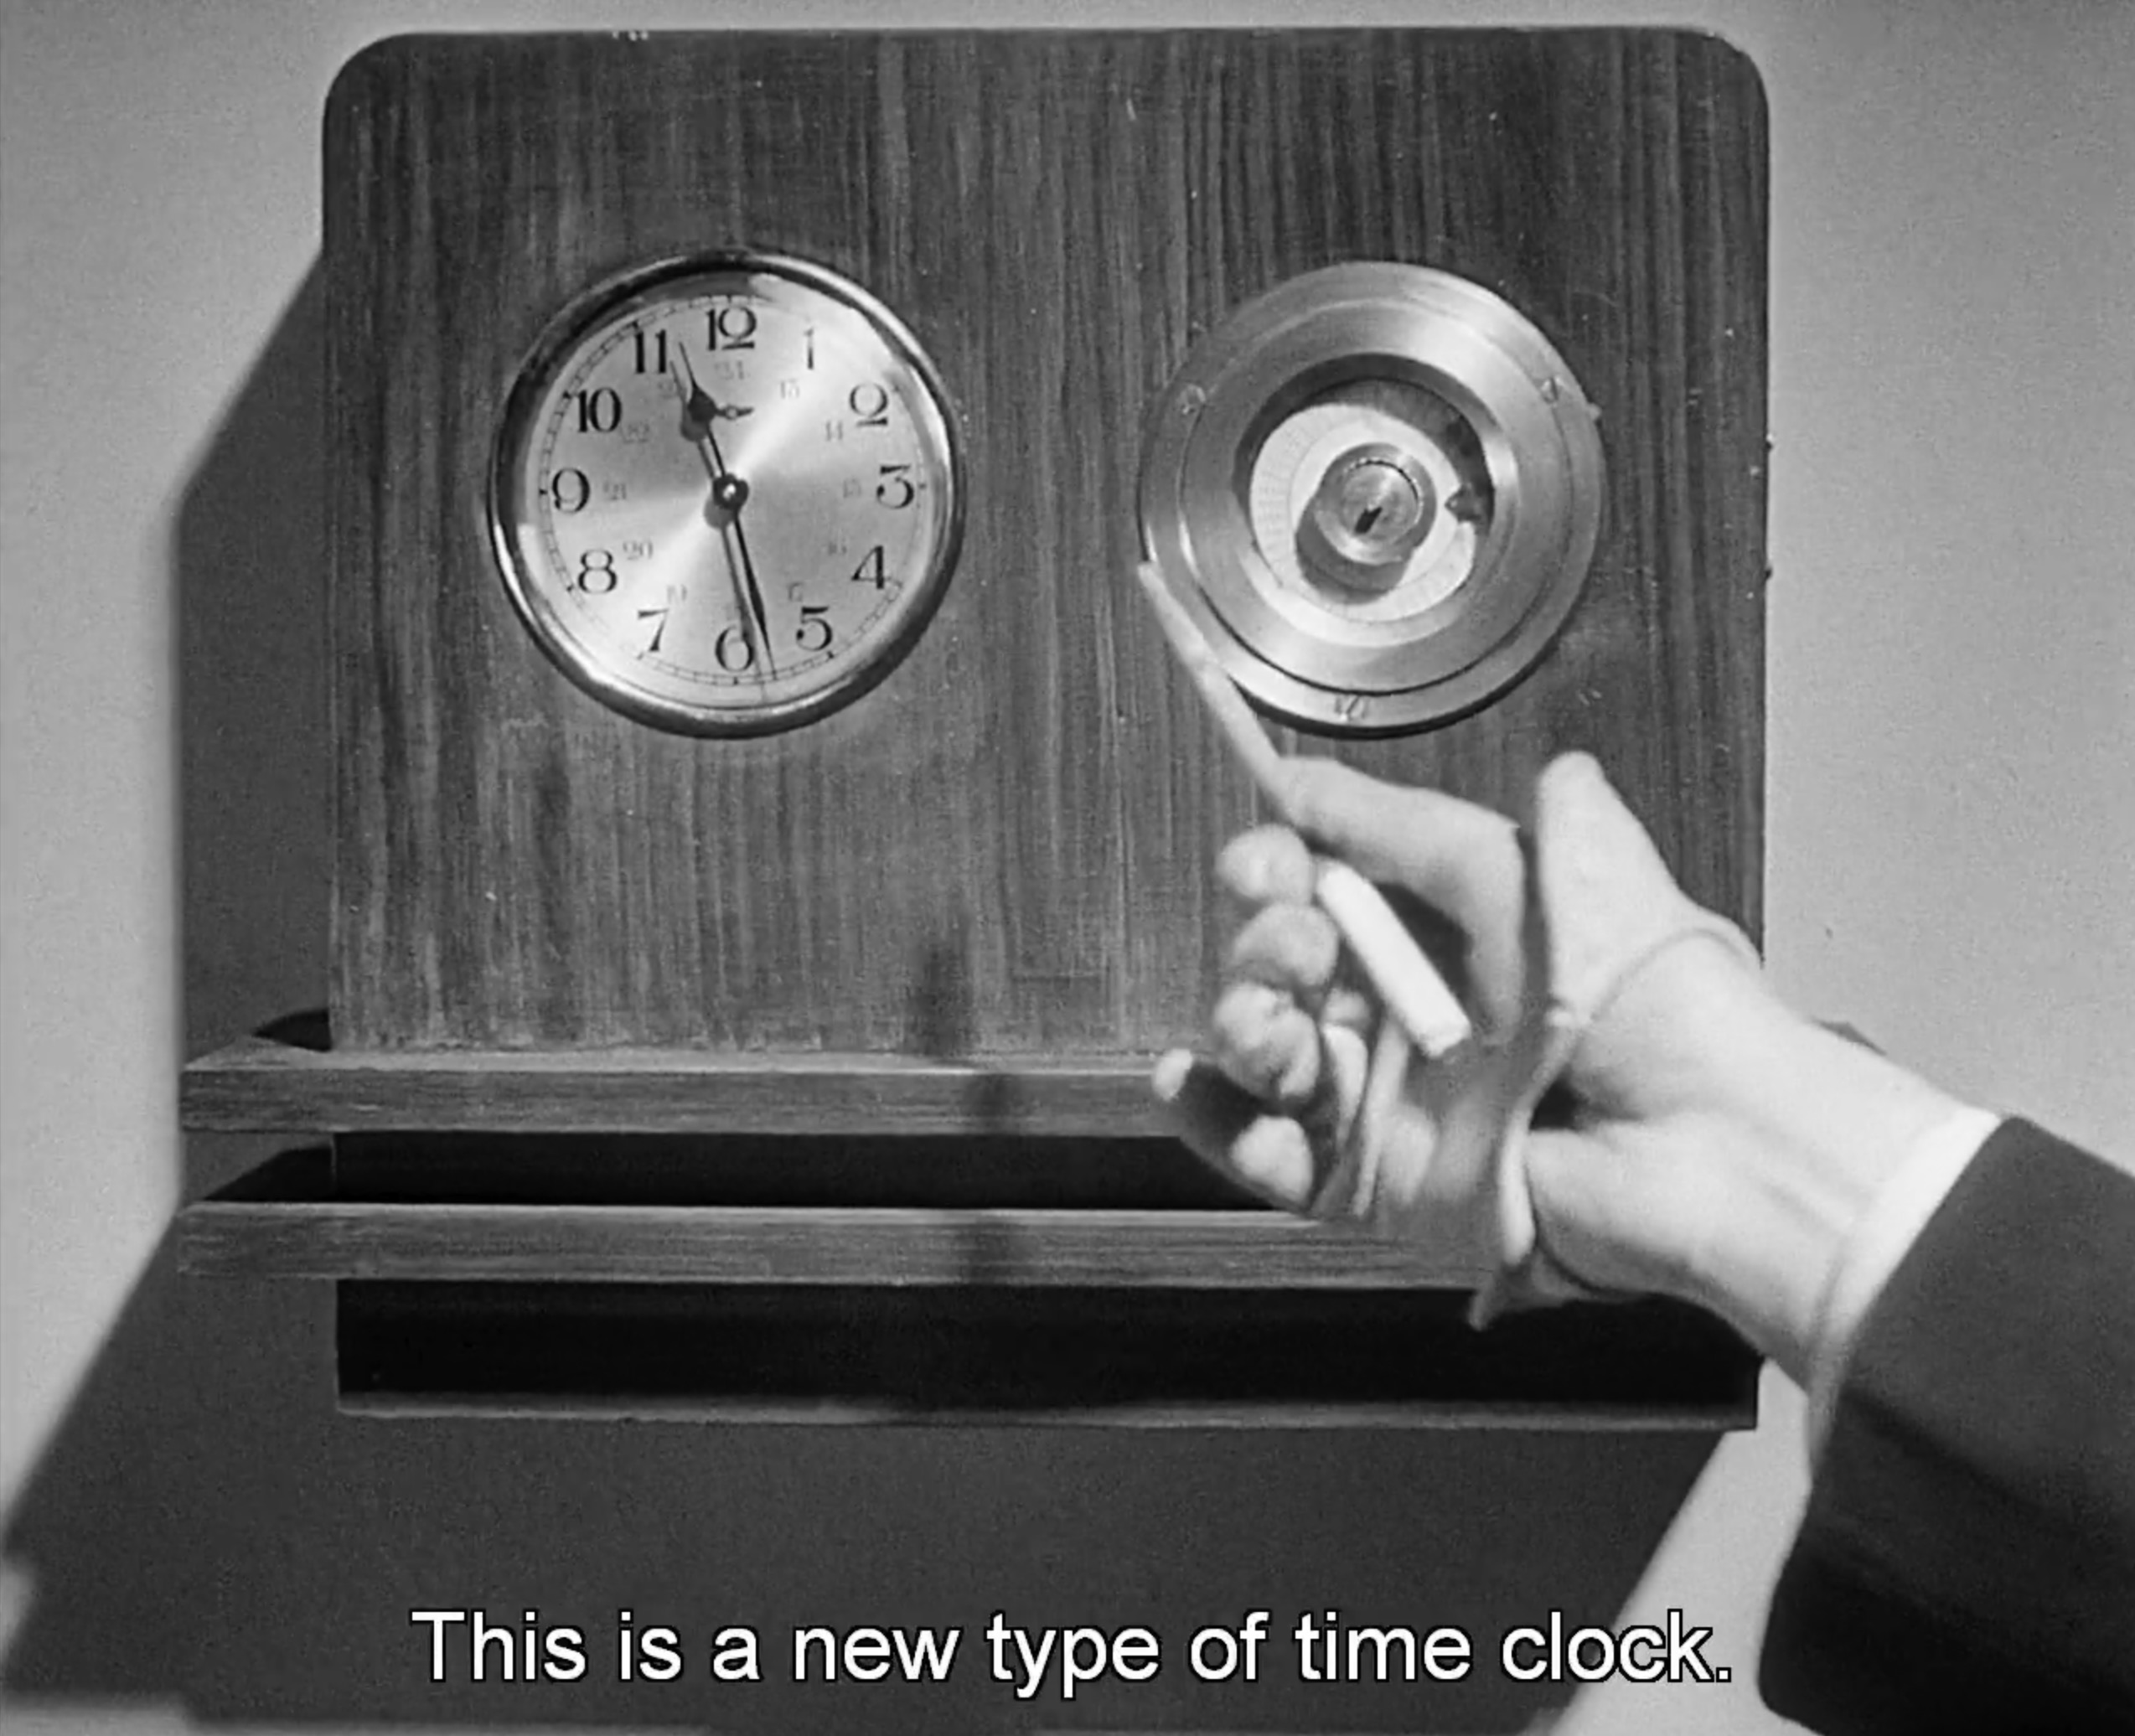 Still image from M, showing a security clock